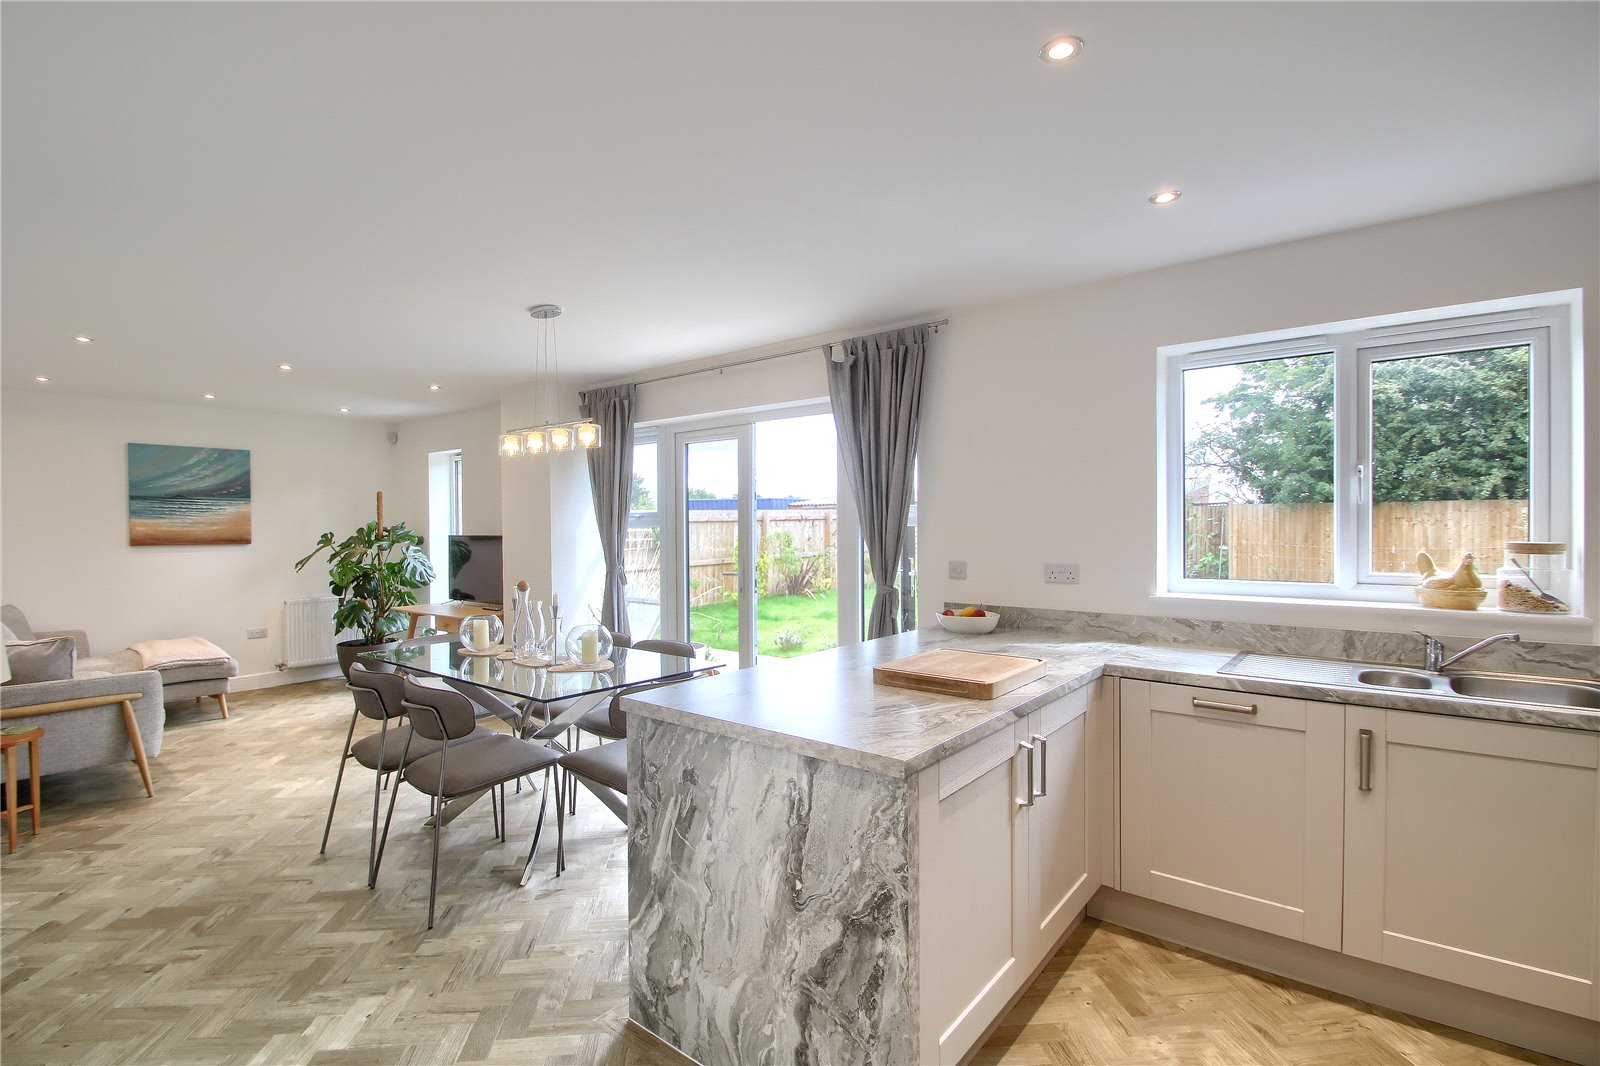 4 bed house for sale in Blackthorn Drive, Hurworth 1